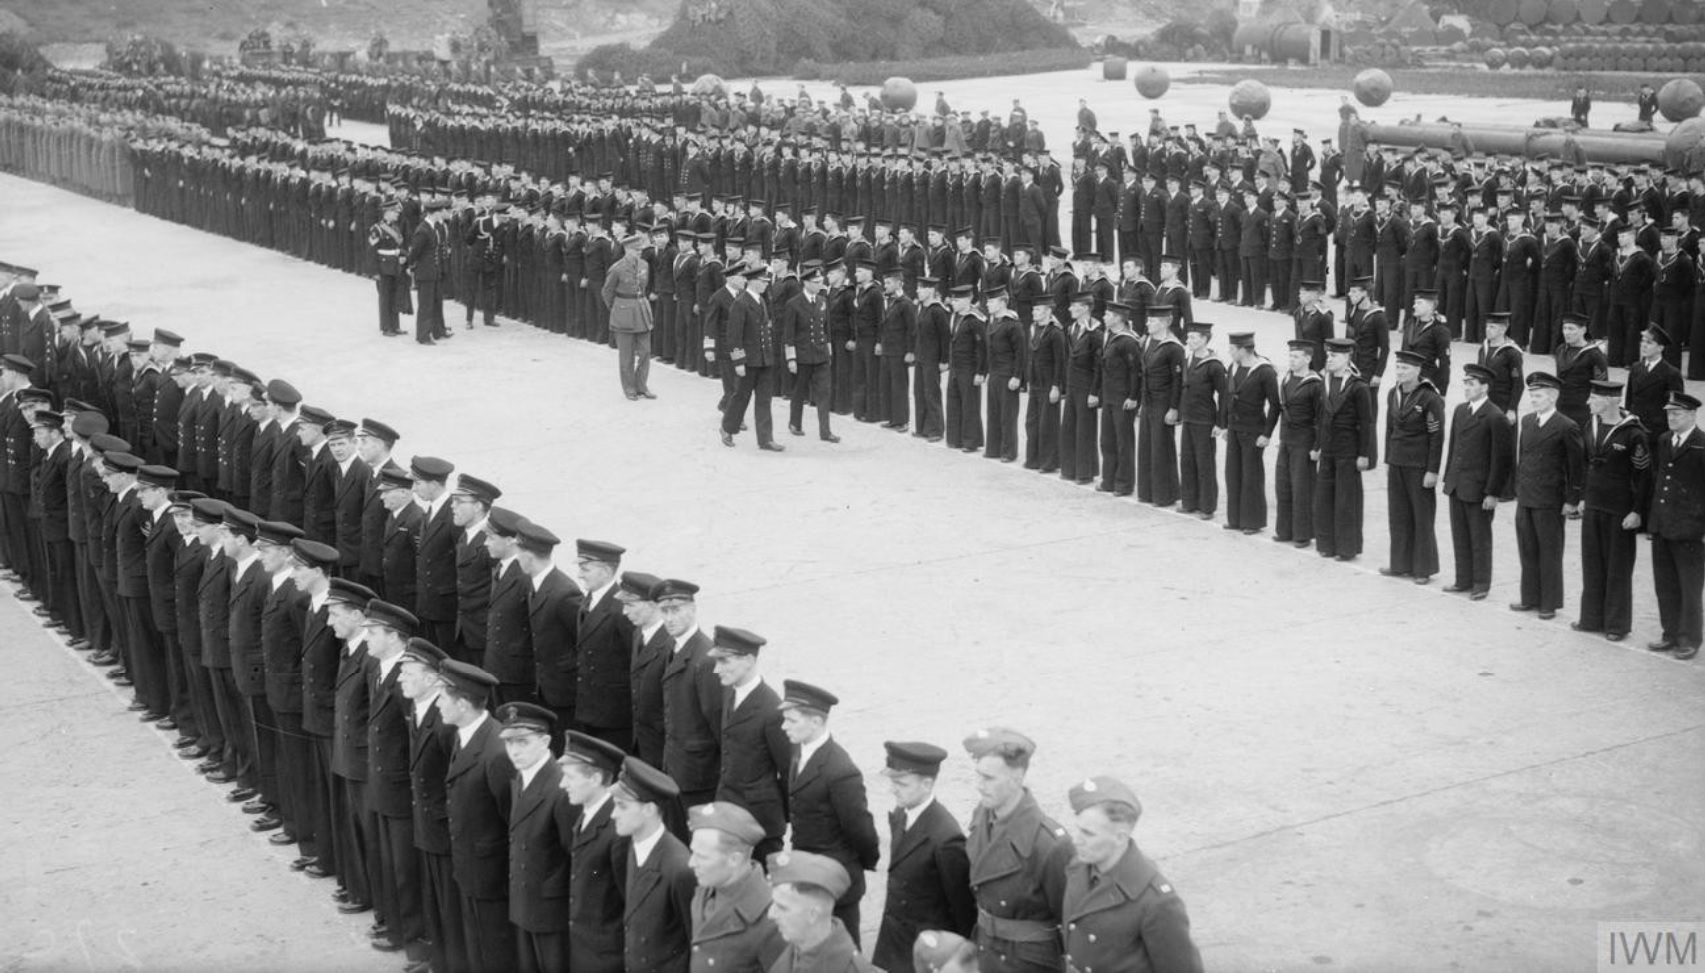 King George VI of the United Kingdom inspecting trawler men & naval personnel at Lyness, Scapa Flow, Orkney Islands, Scotland, United Kingdom, 8 Jun 1942